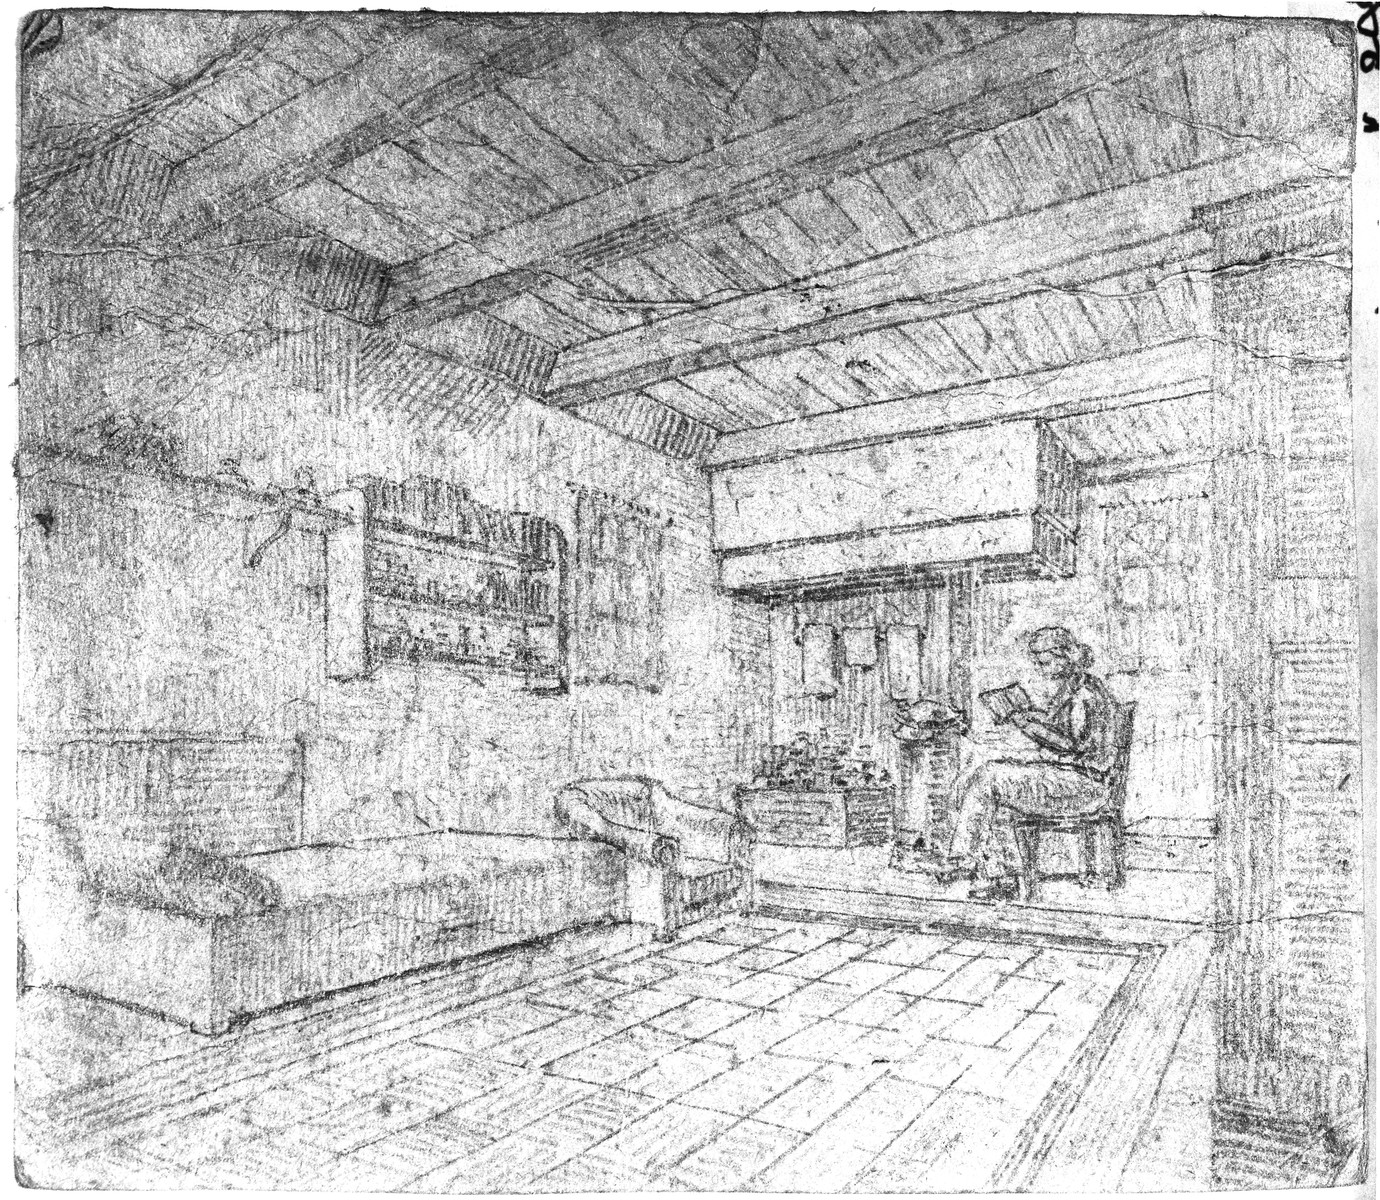 Drawing made by Richard Bloch of the room where he and his wife were hiding in Nunspeet, Holland.

The room was an old bakehouse adjacent to the home of the Alblas family.